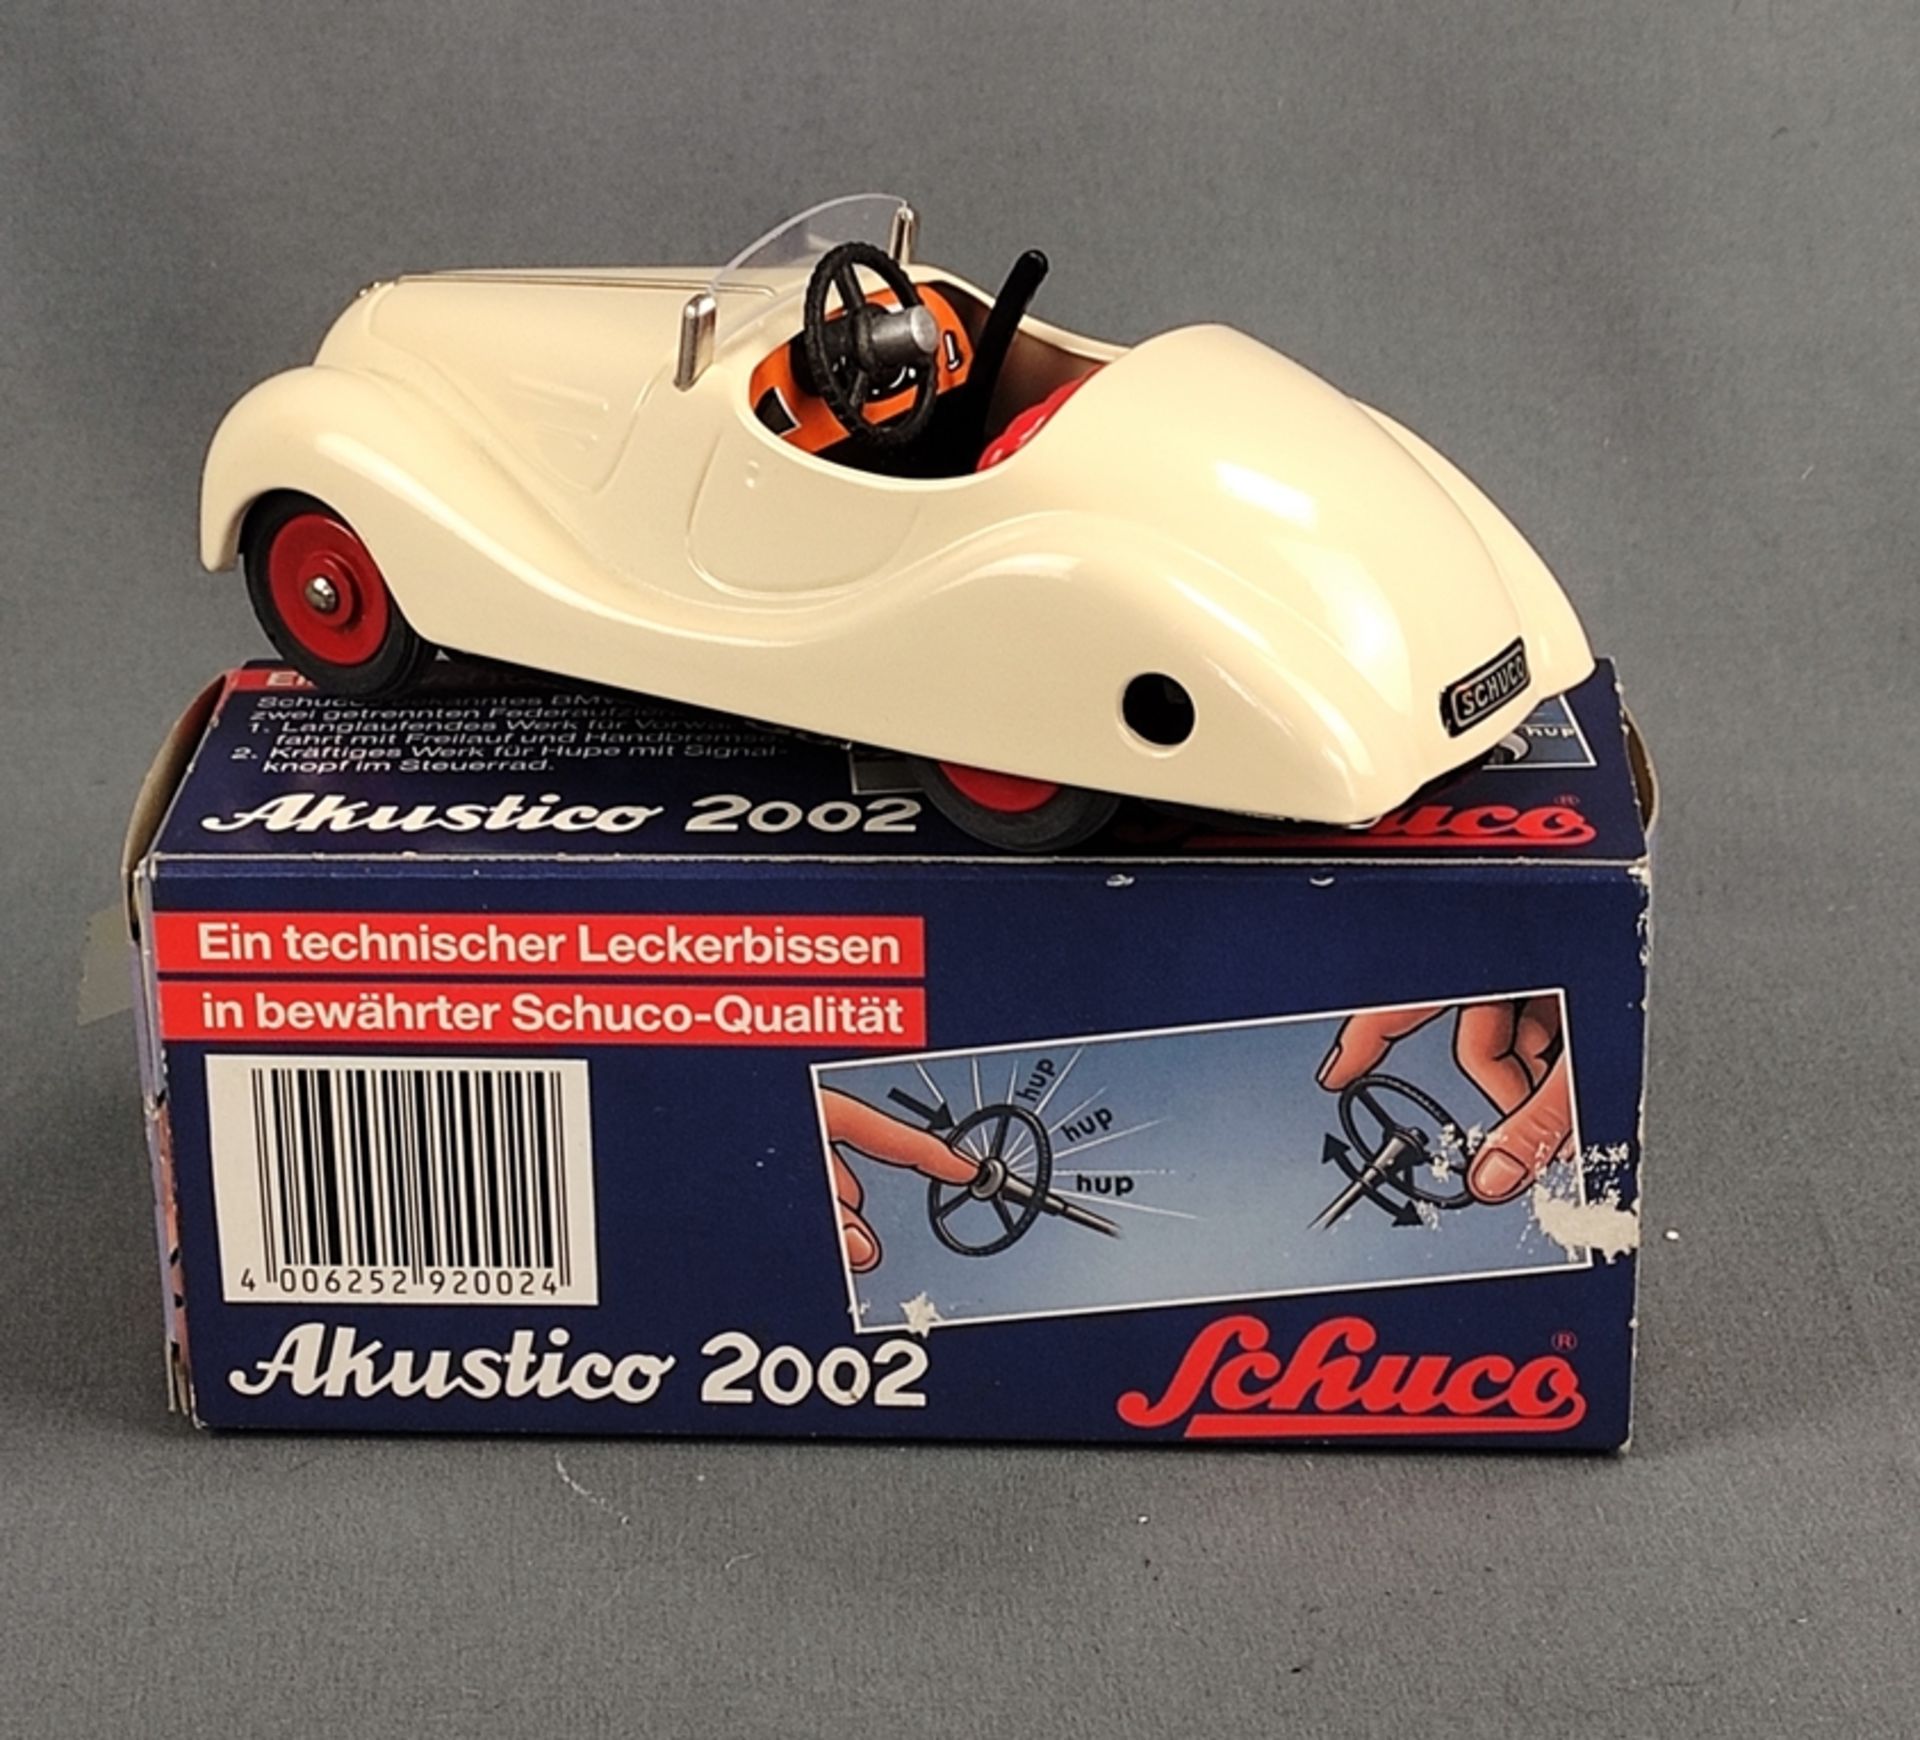 Schuco "Akustico 2002", white, intact, in original box, in good condition - Image 2 of 2